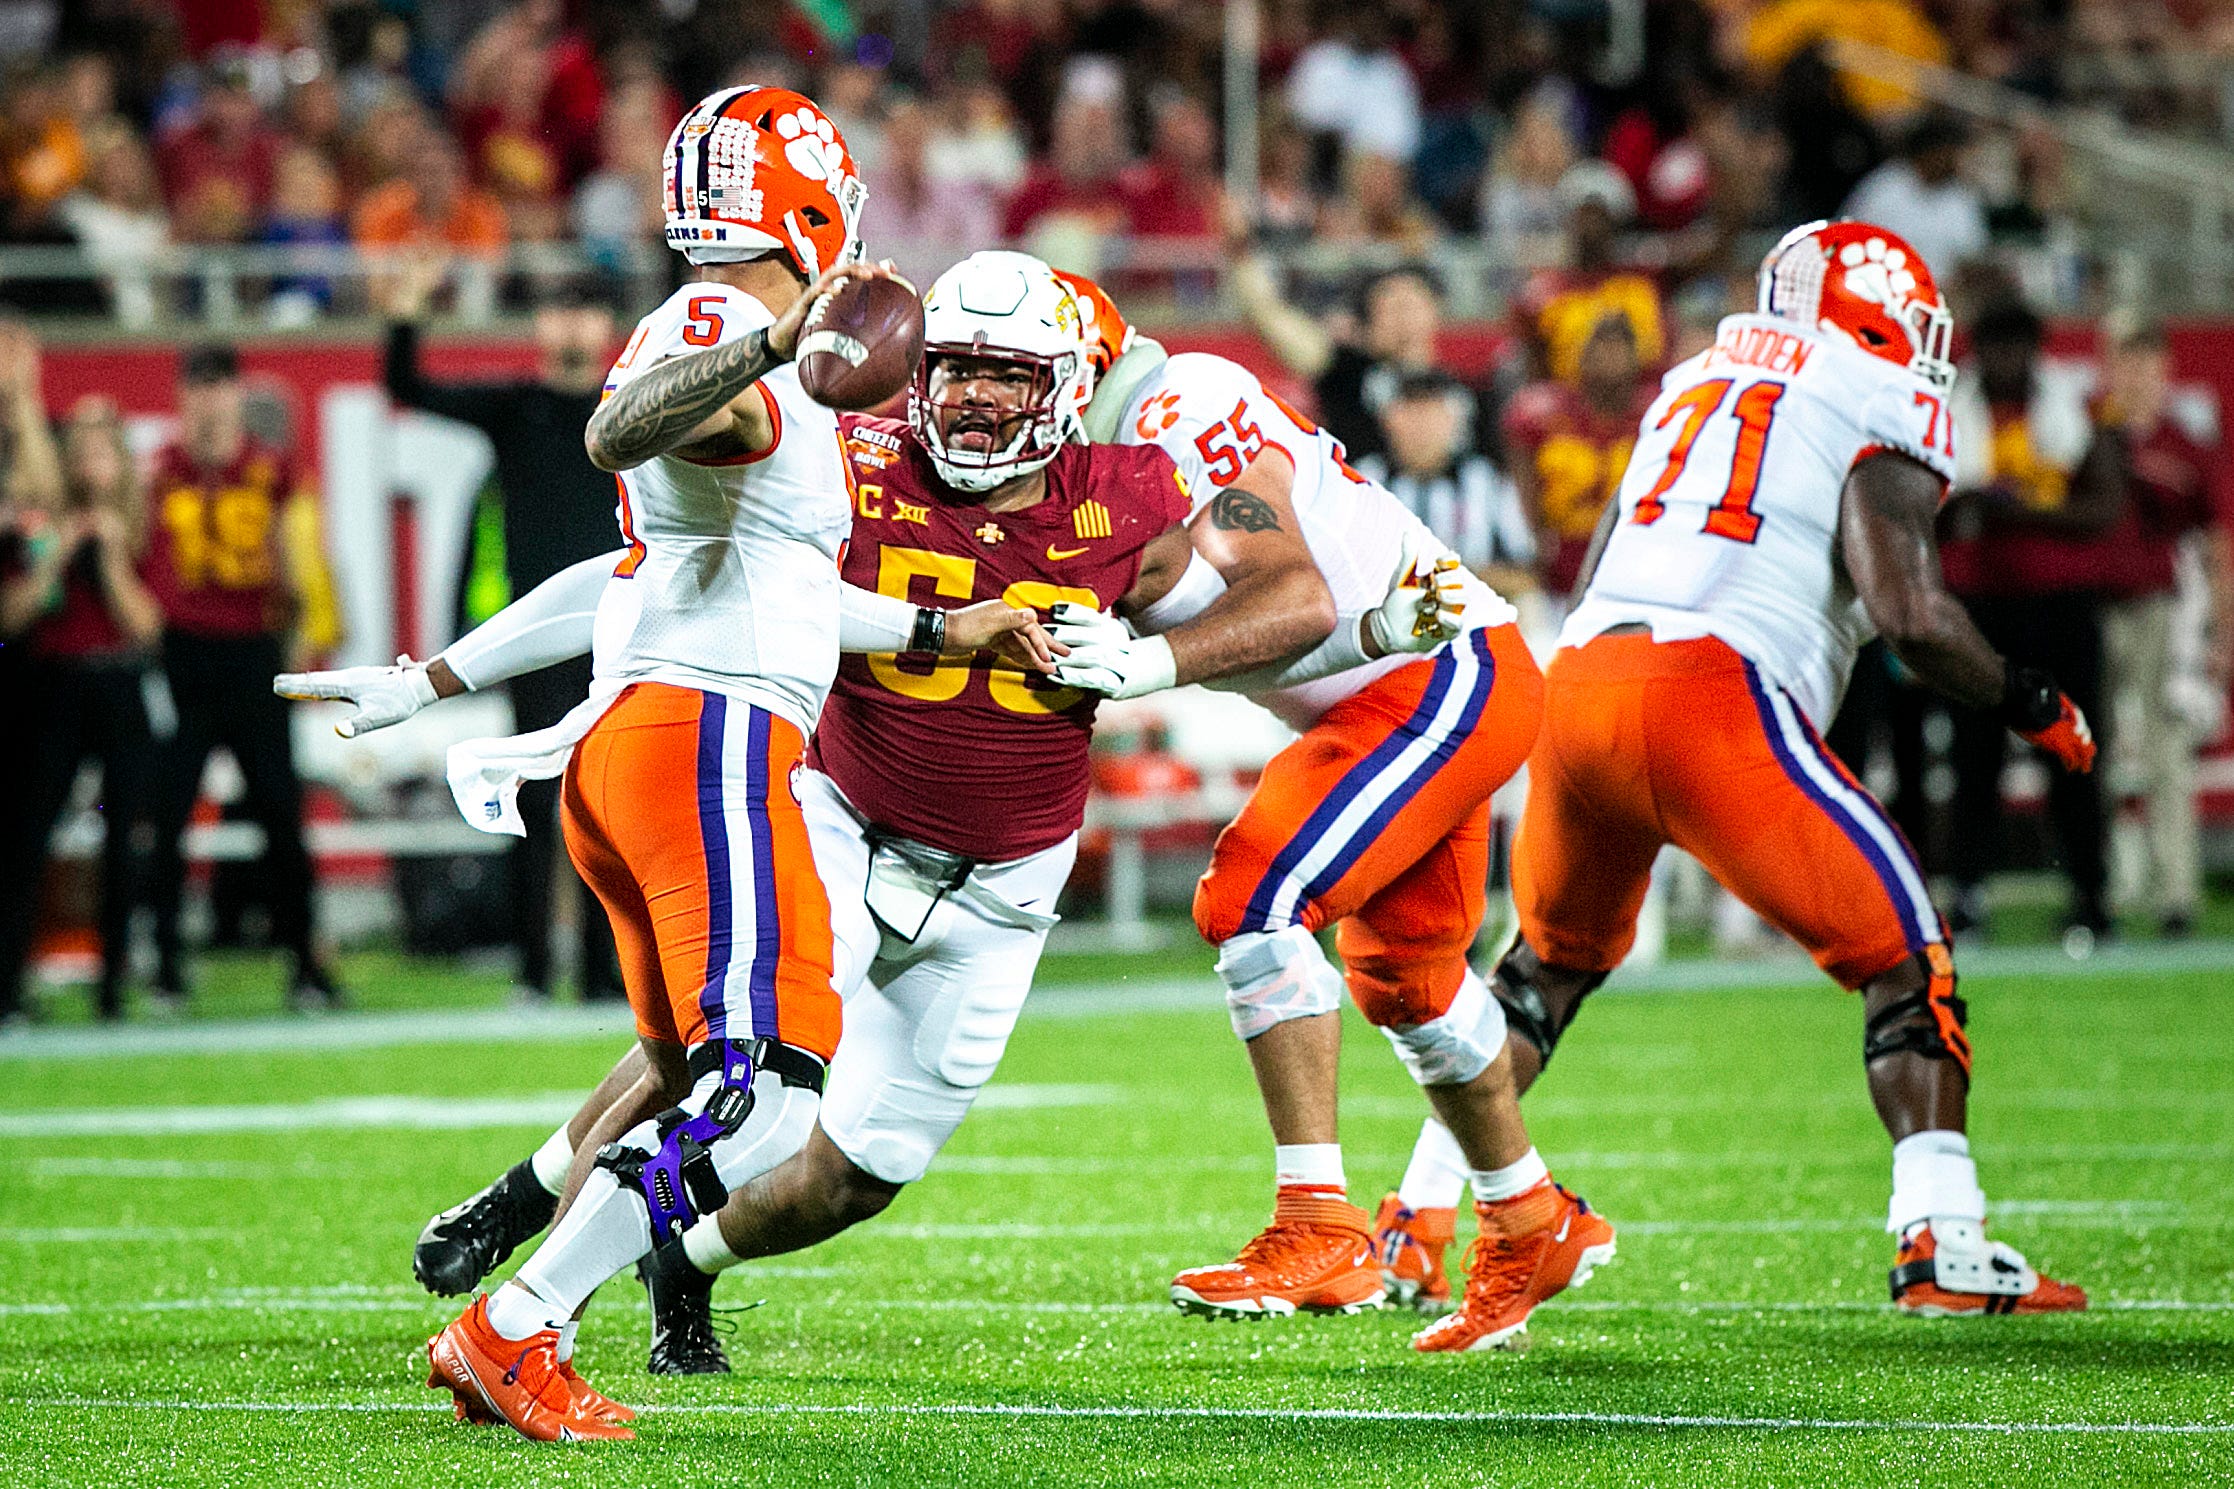 Iowa State defensive end Eyioma Uwazurike (58) pressures Clemson quarterback DJ Uiagalelei (5) during a NCAA college football game in the Cheez-It Bowl, Wednesday, Dec. 29, 2021, at Camping World Stadium in Orlando, Fla.